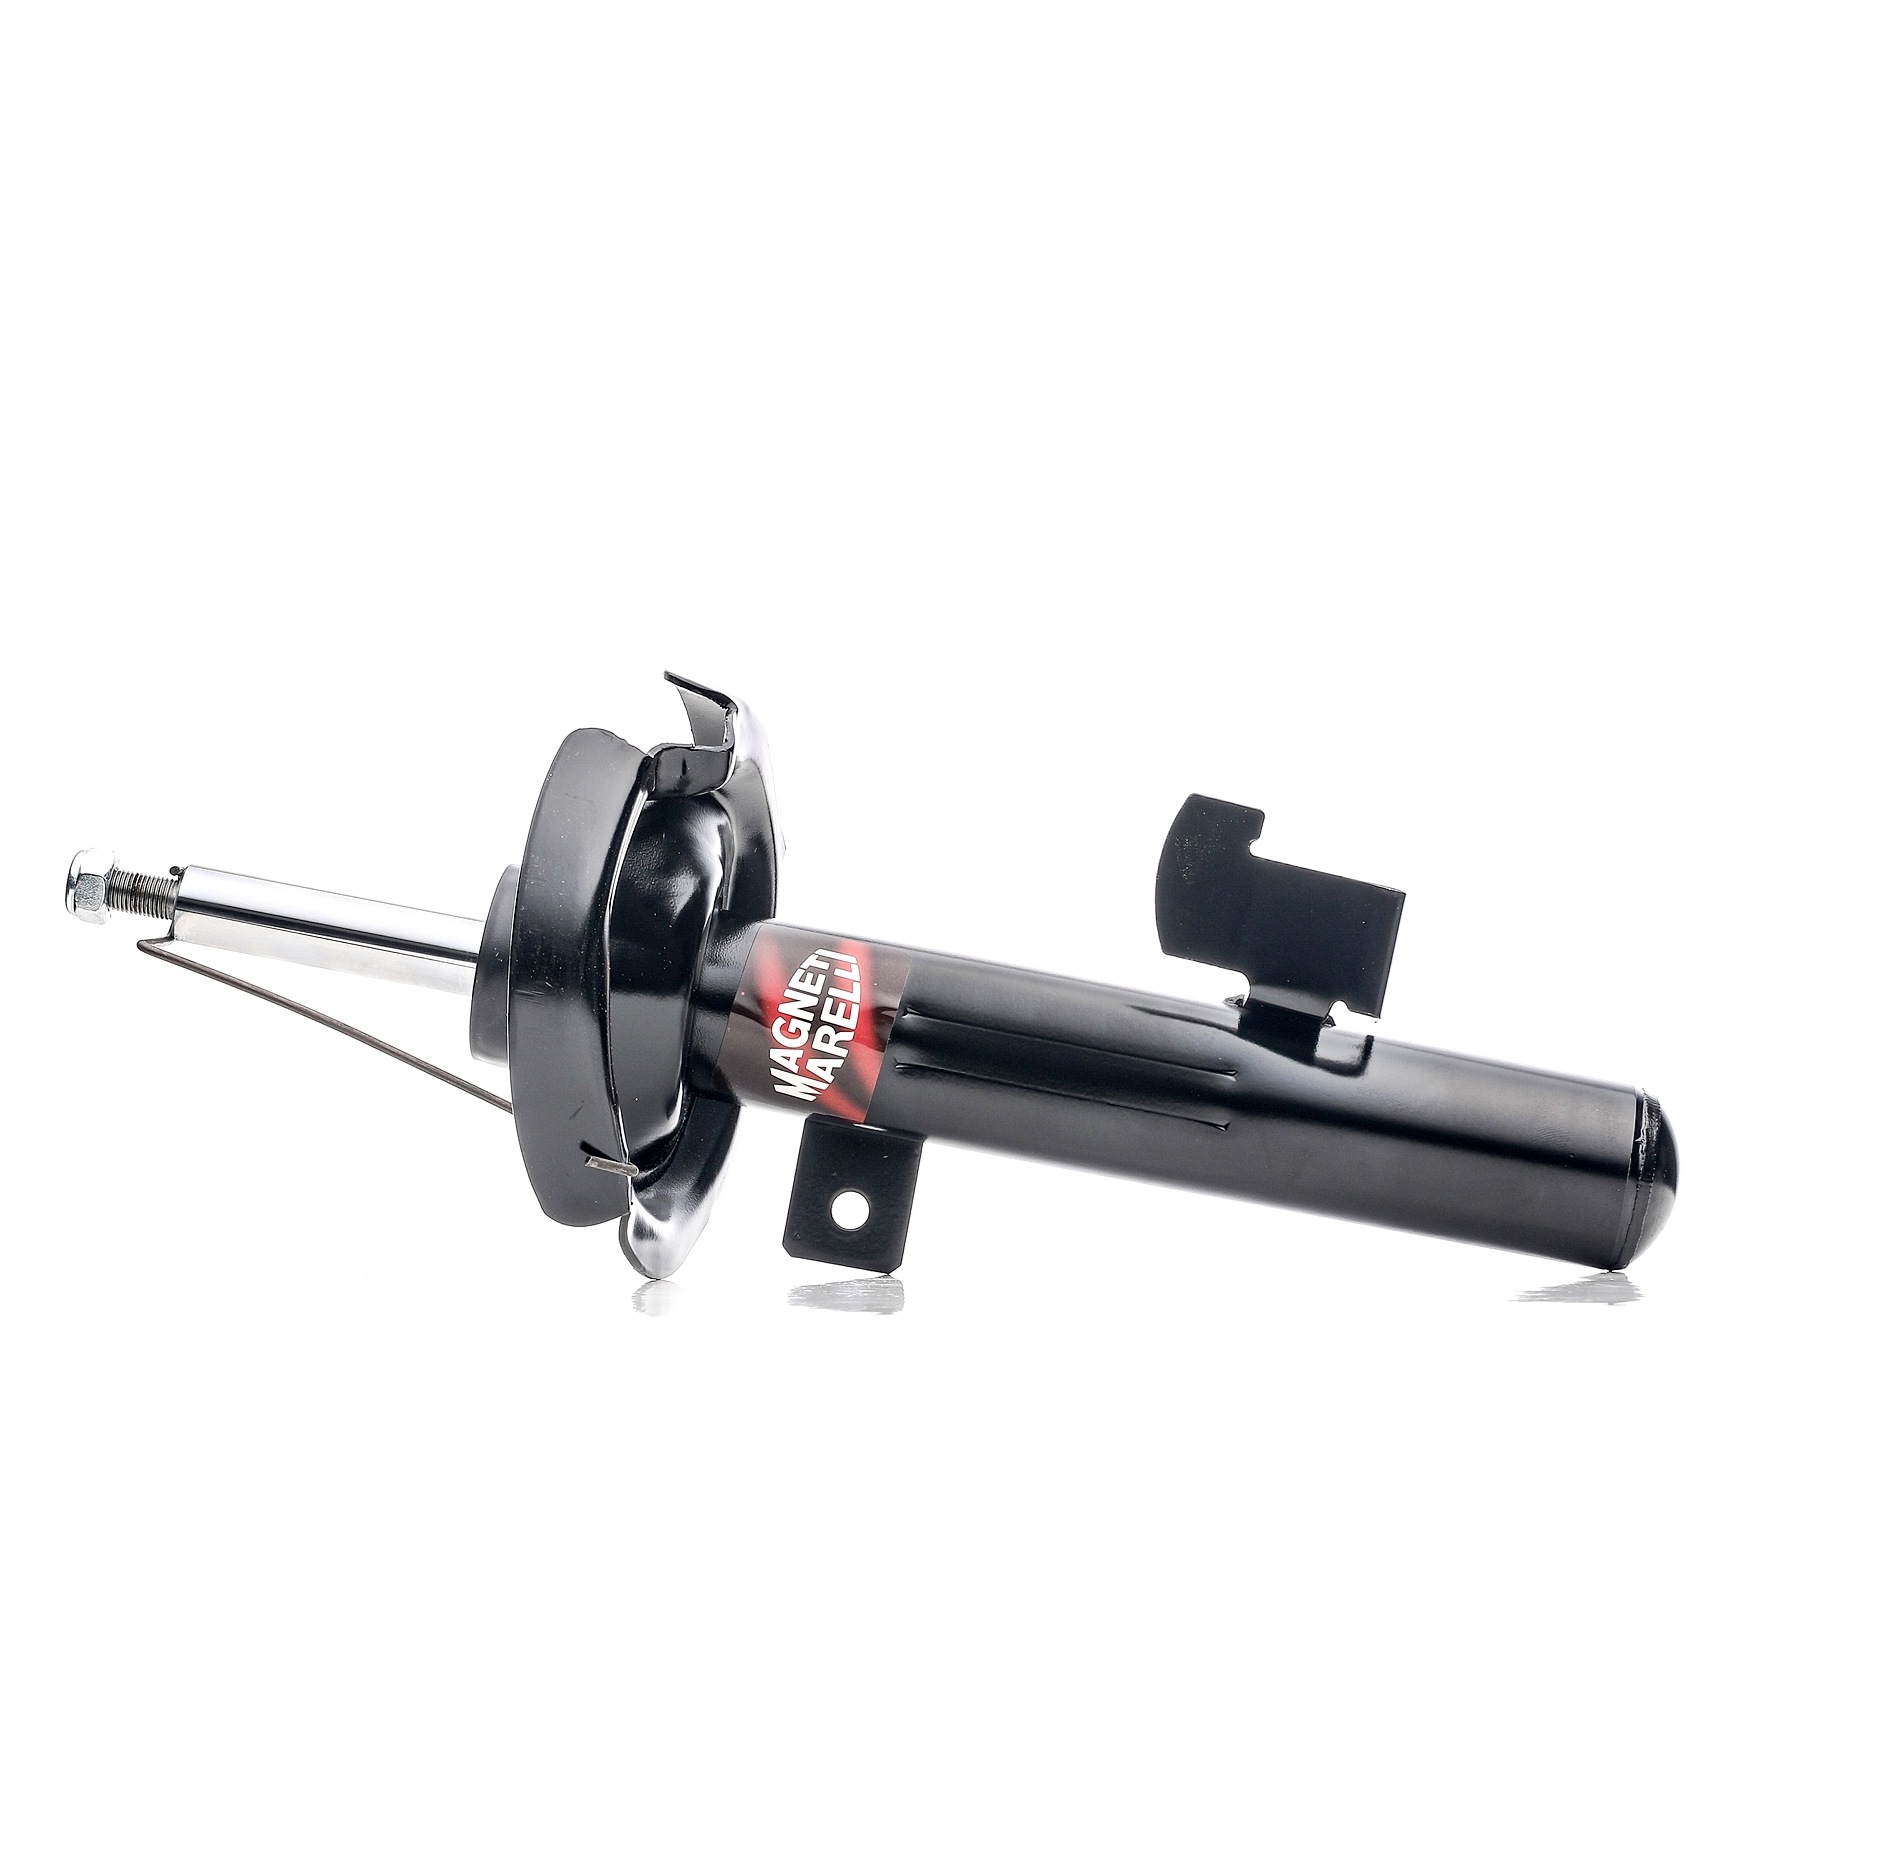 MAGNETI MARELLI 351384070100 Shock absorber Front Axle Right, Gas Pressure, Twin-Tube, Suspension Strut, Top pin